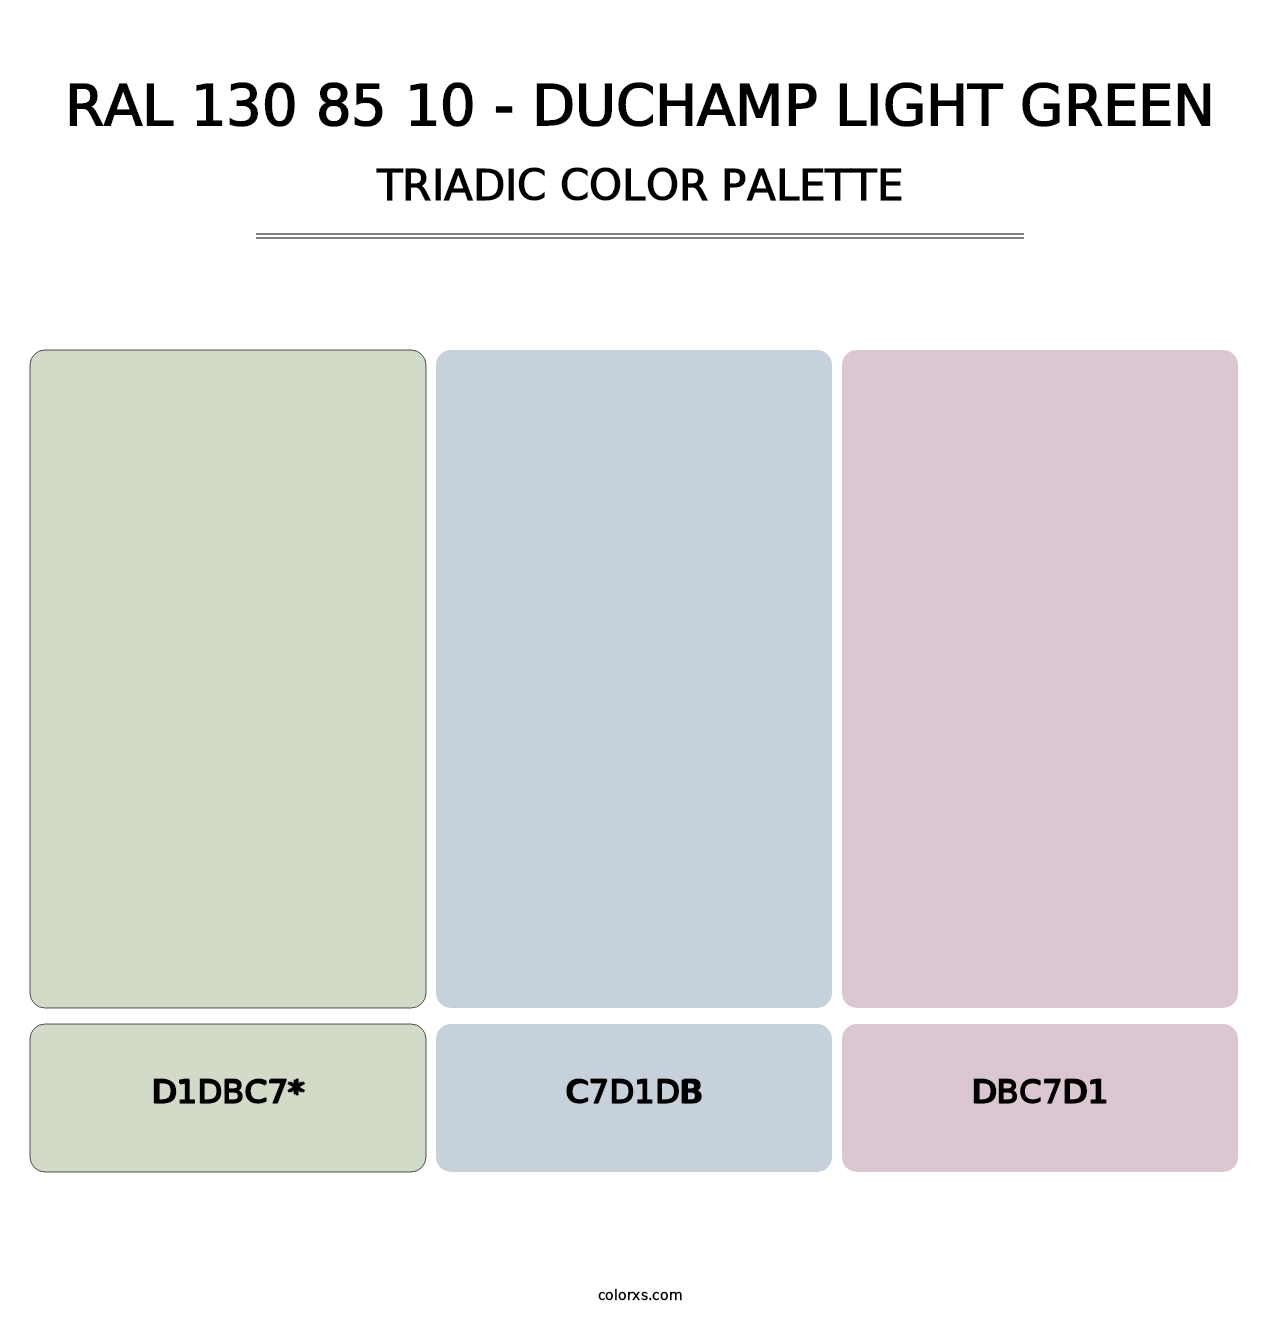 RAL 130 85 10 - Duchamp Light Green - Triadic Color Palette